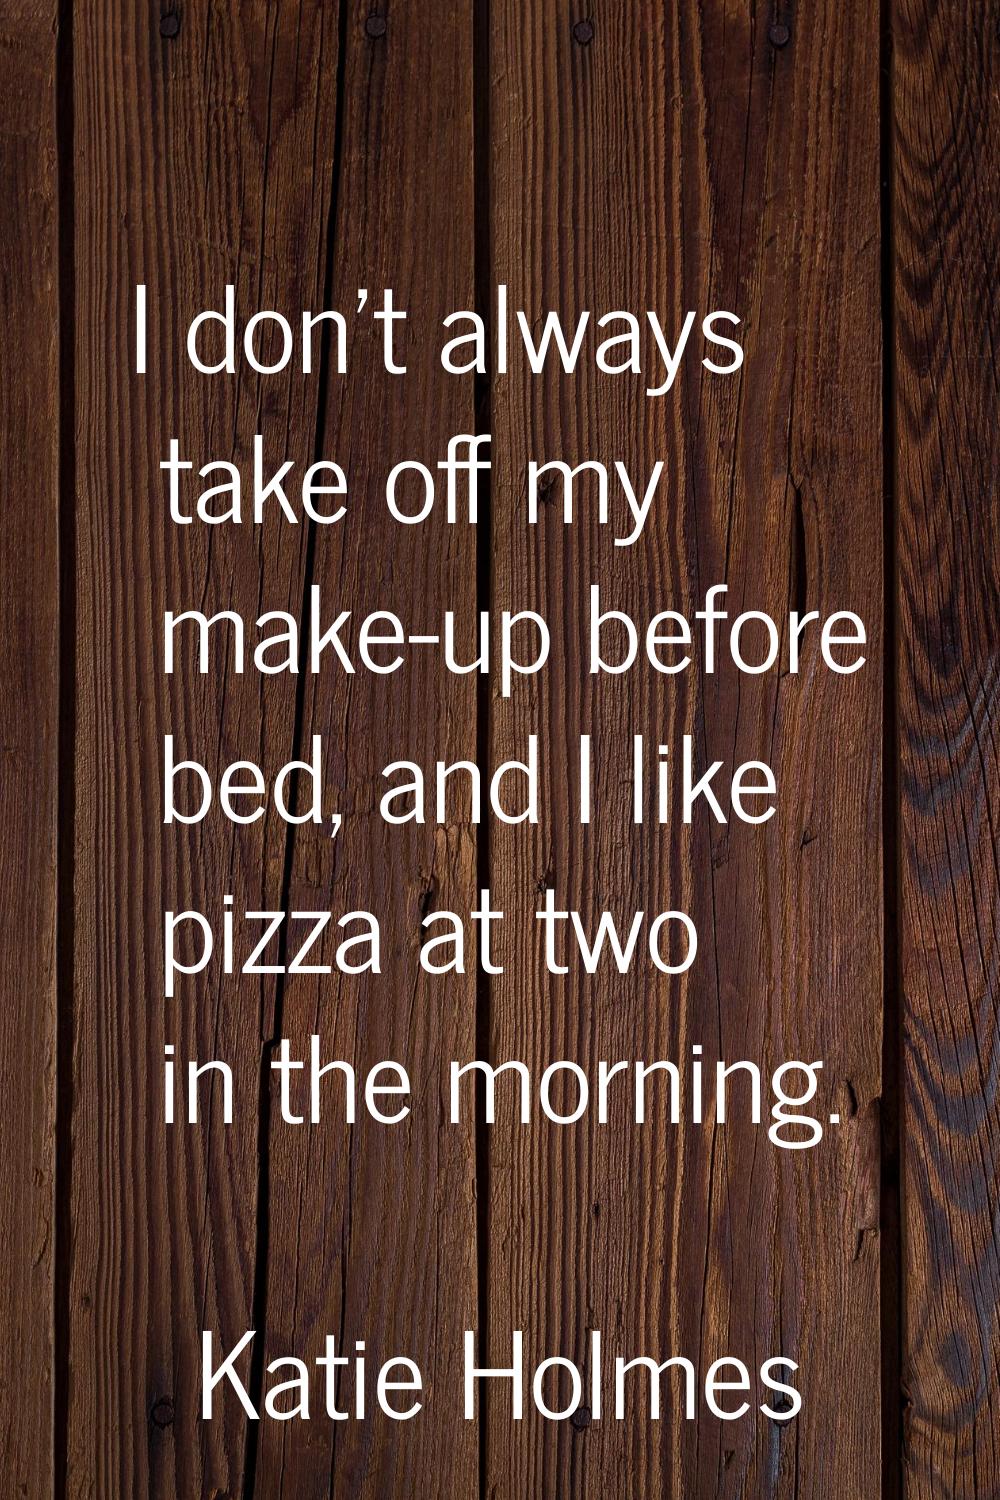 I don't always take off my make-up before bed, and I like pizza at two in the morning.